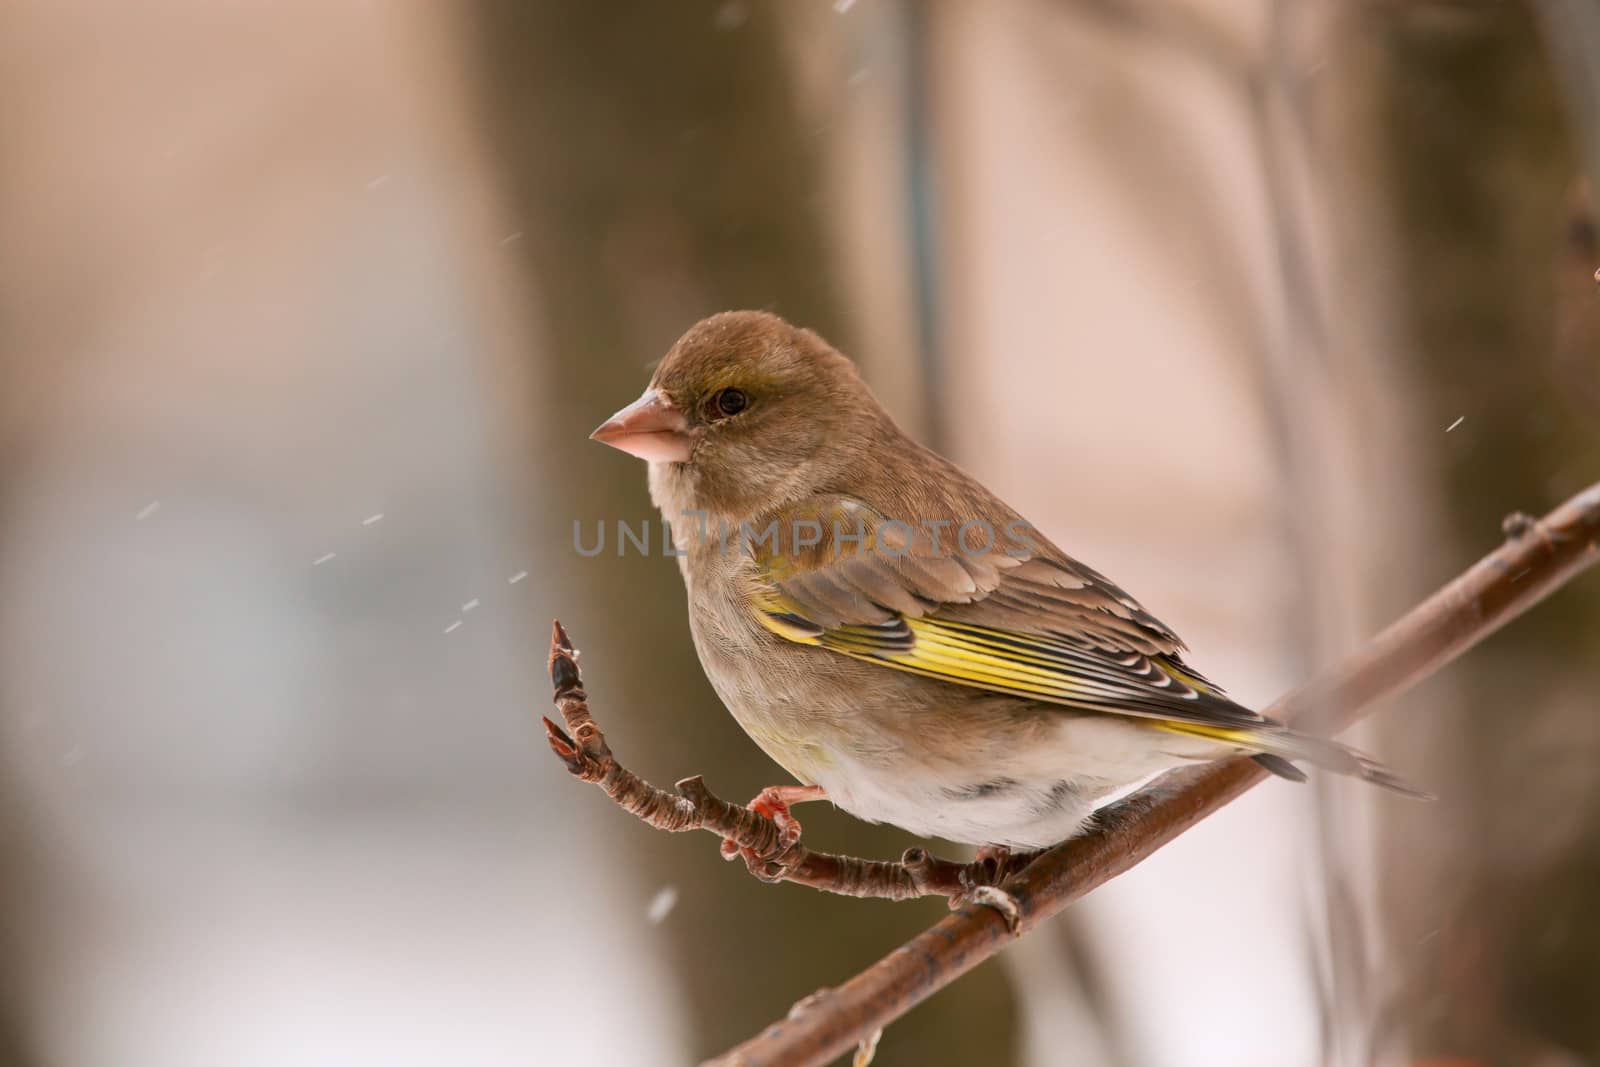 The greenfinch sits on a mountain ash branch in rainy winter day